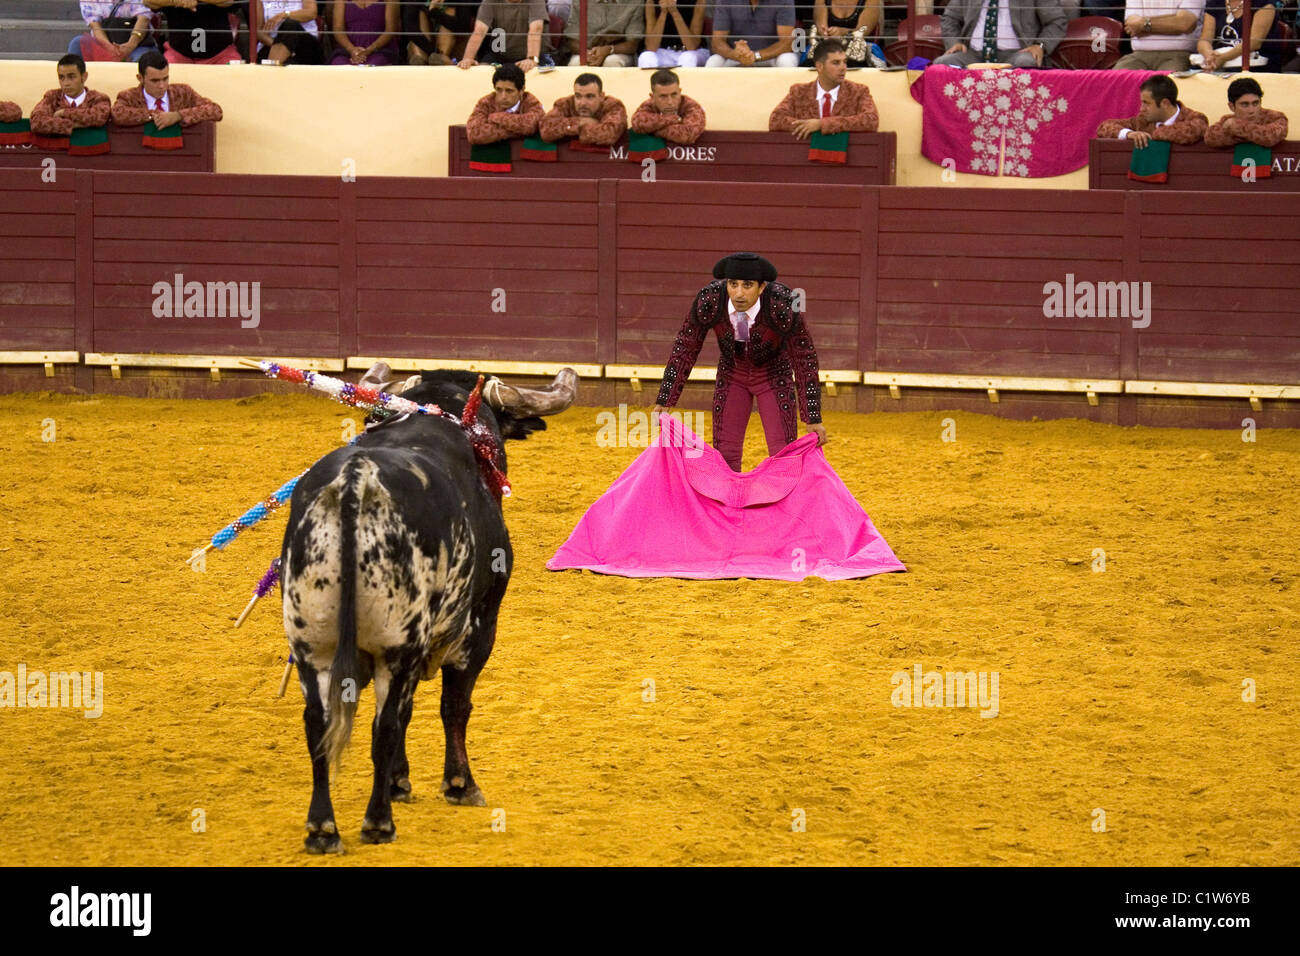 A Matadore in action during Portuguese style bullfighting at the Campo Pequeno in Lisbon, Portugal. Stock Photo